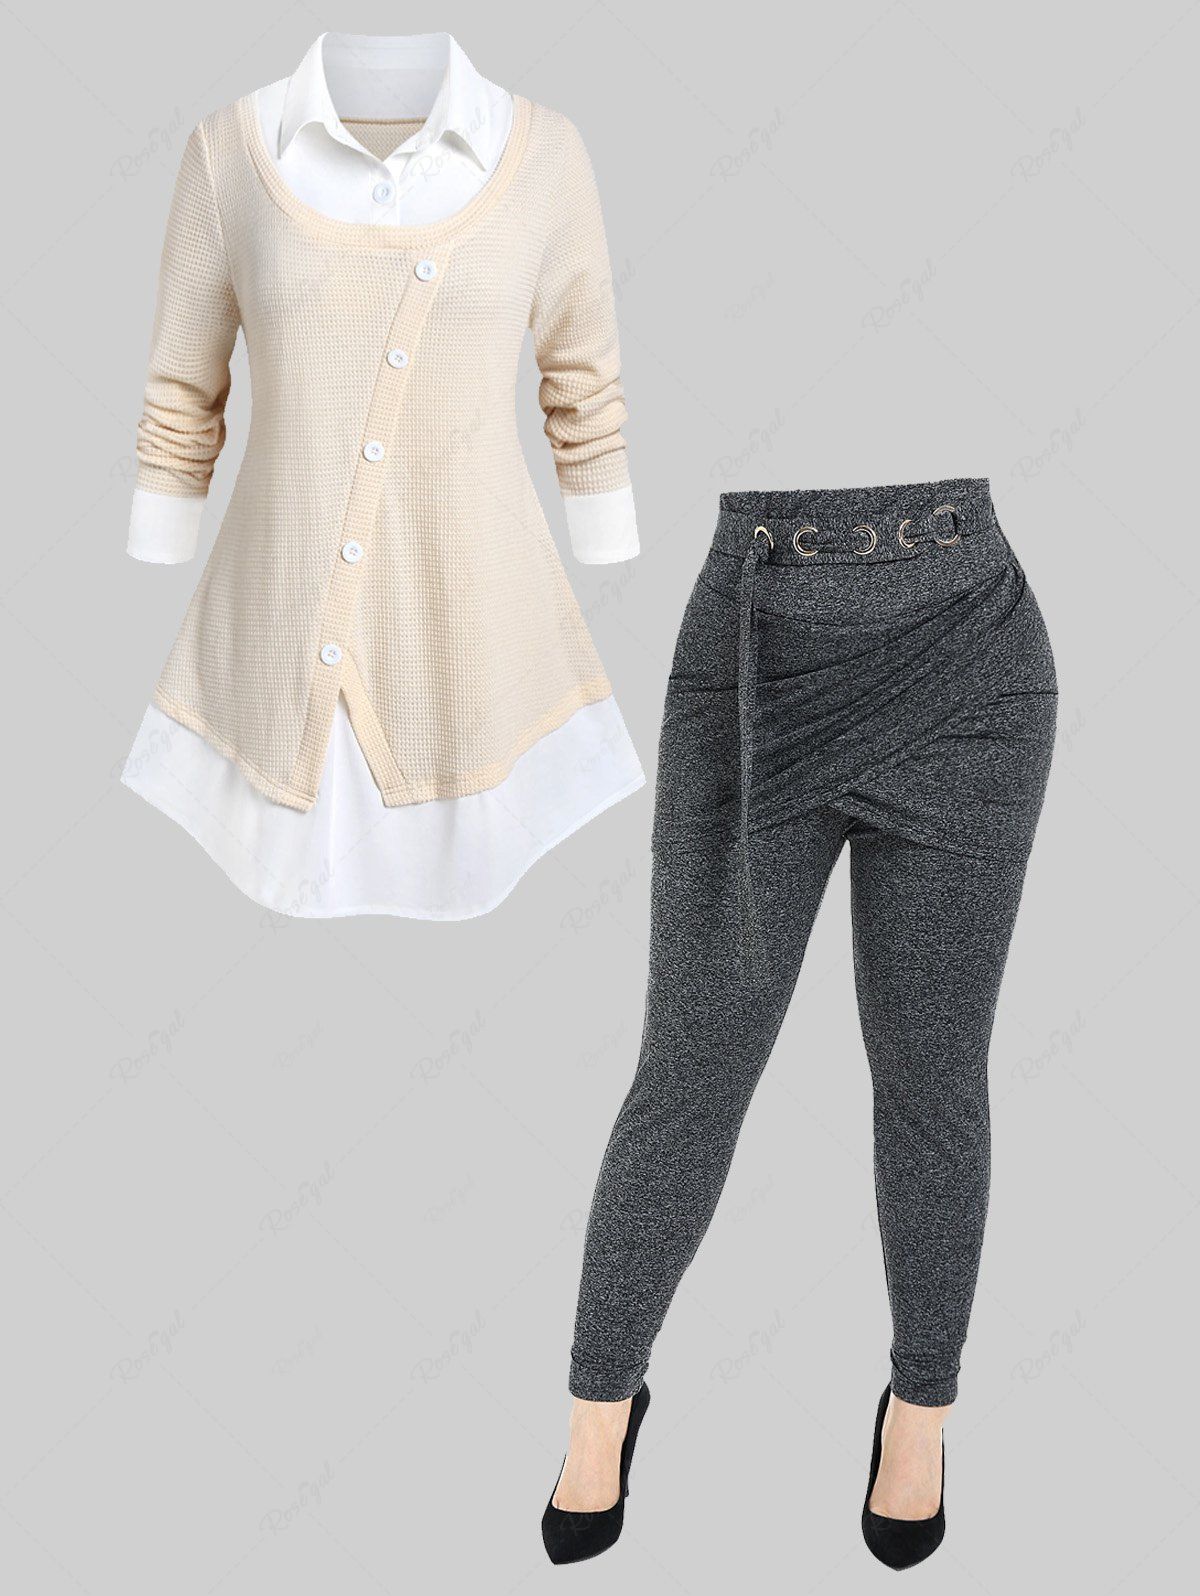 Best Shirt Collar Two Tone Long Sleeves Twofer Sweater and O Ring Heathered Skirted Pants Plus Size Outerwear Outfit  